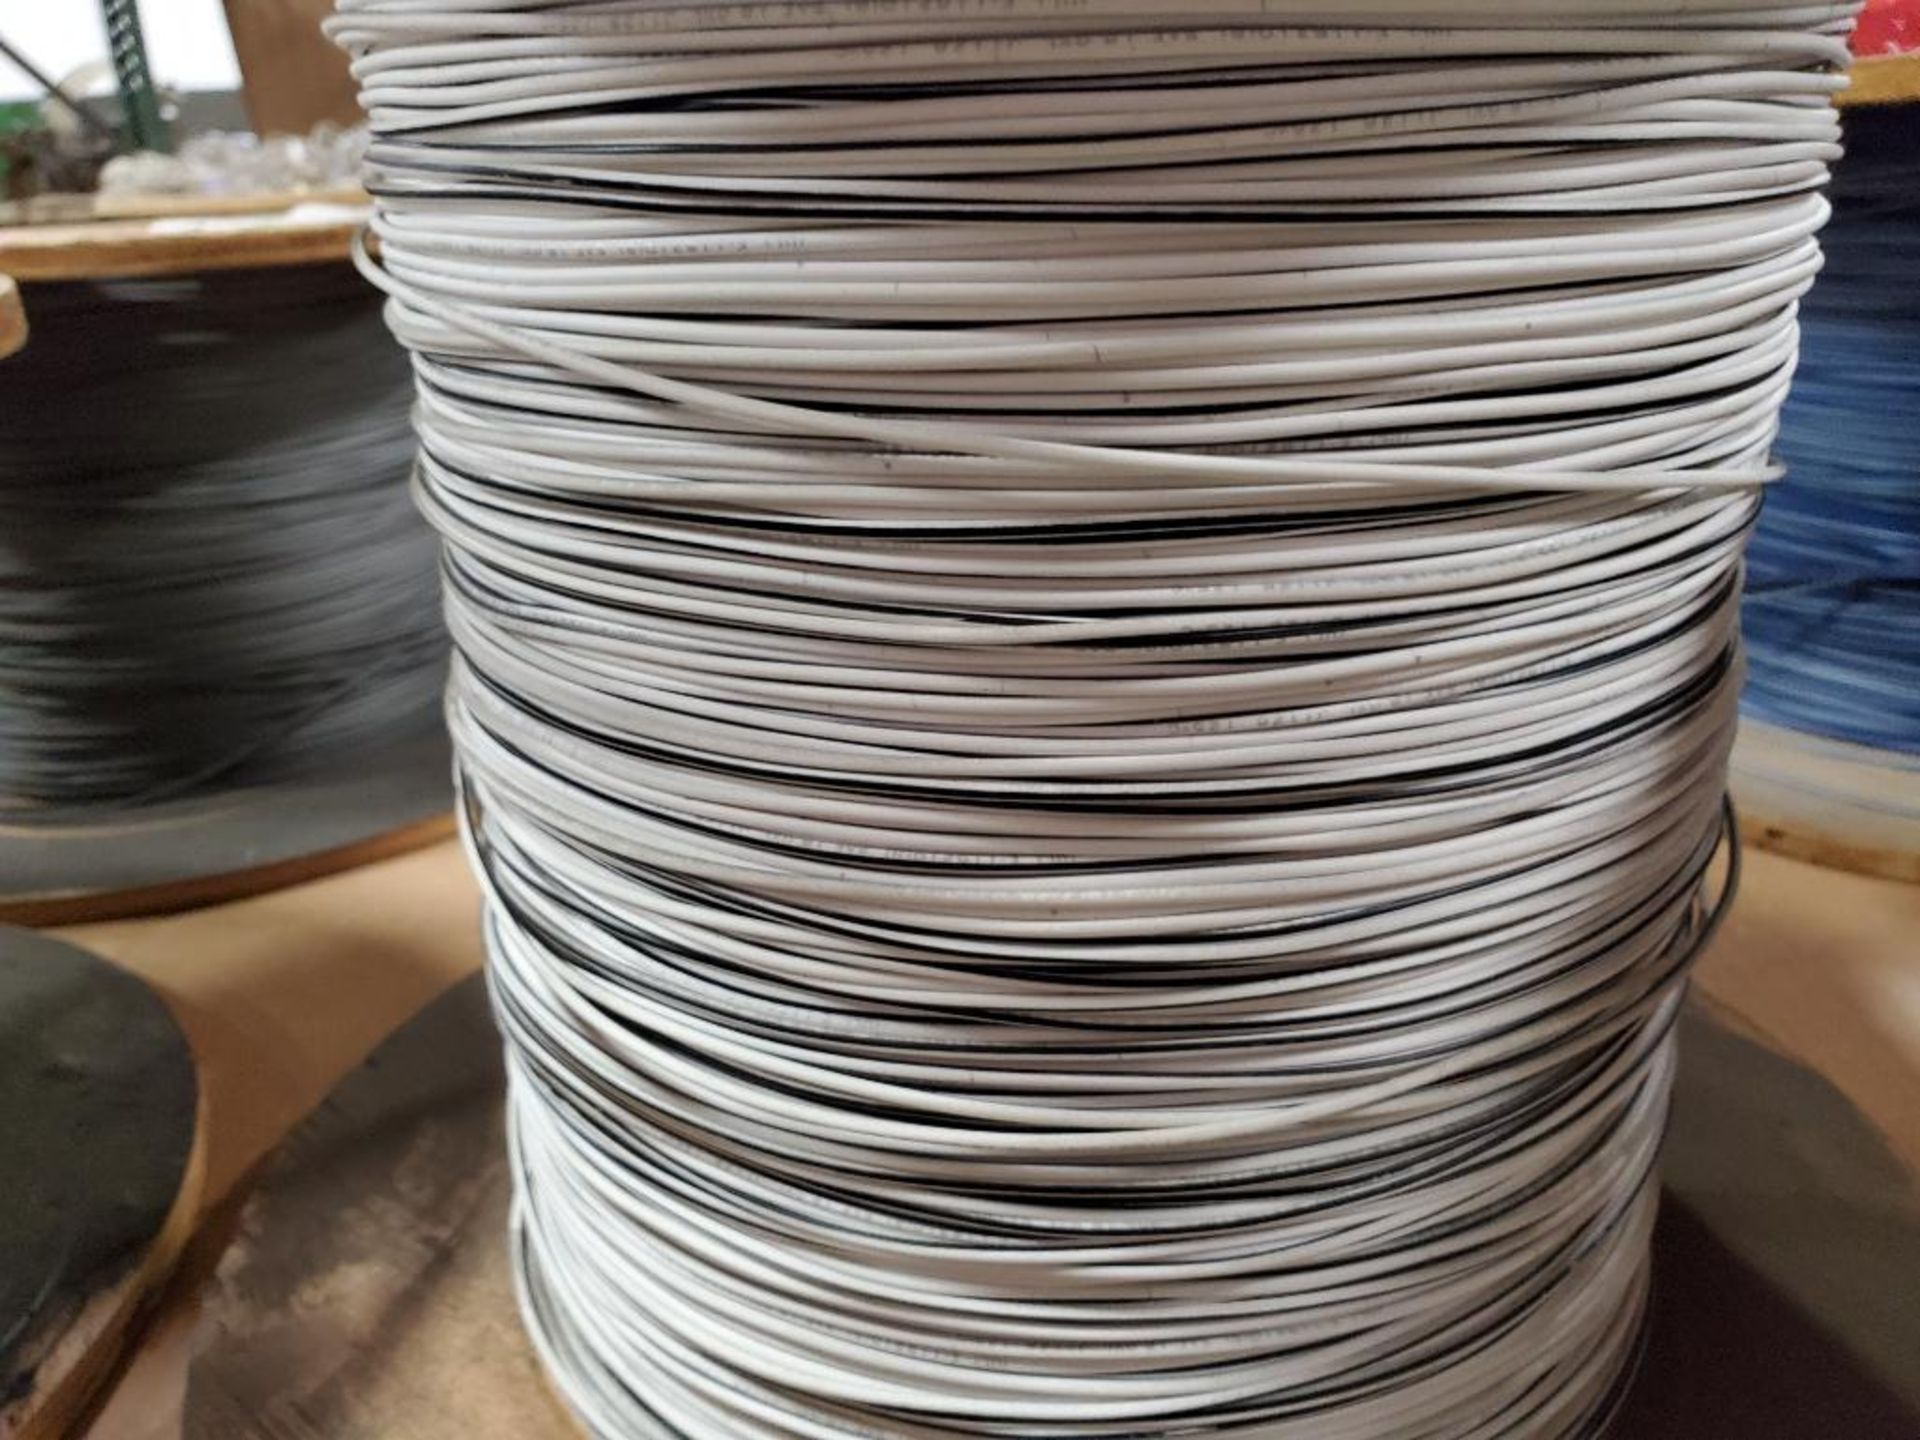 30lbs Partial roll of 18 gauge white/black stranded copper wire. Gross roll weight include spool. - Image 2 of 4